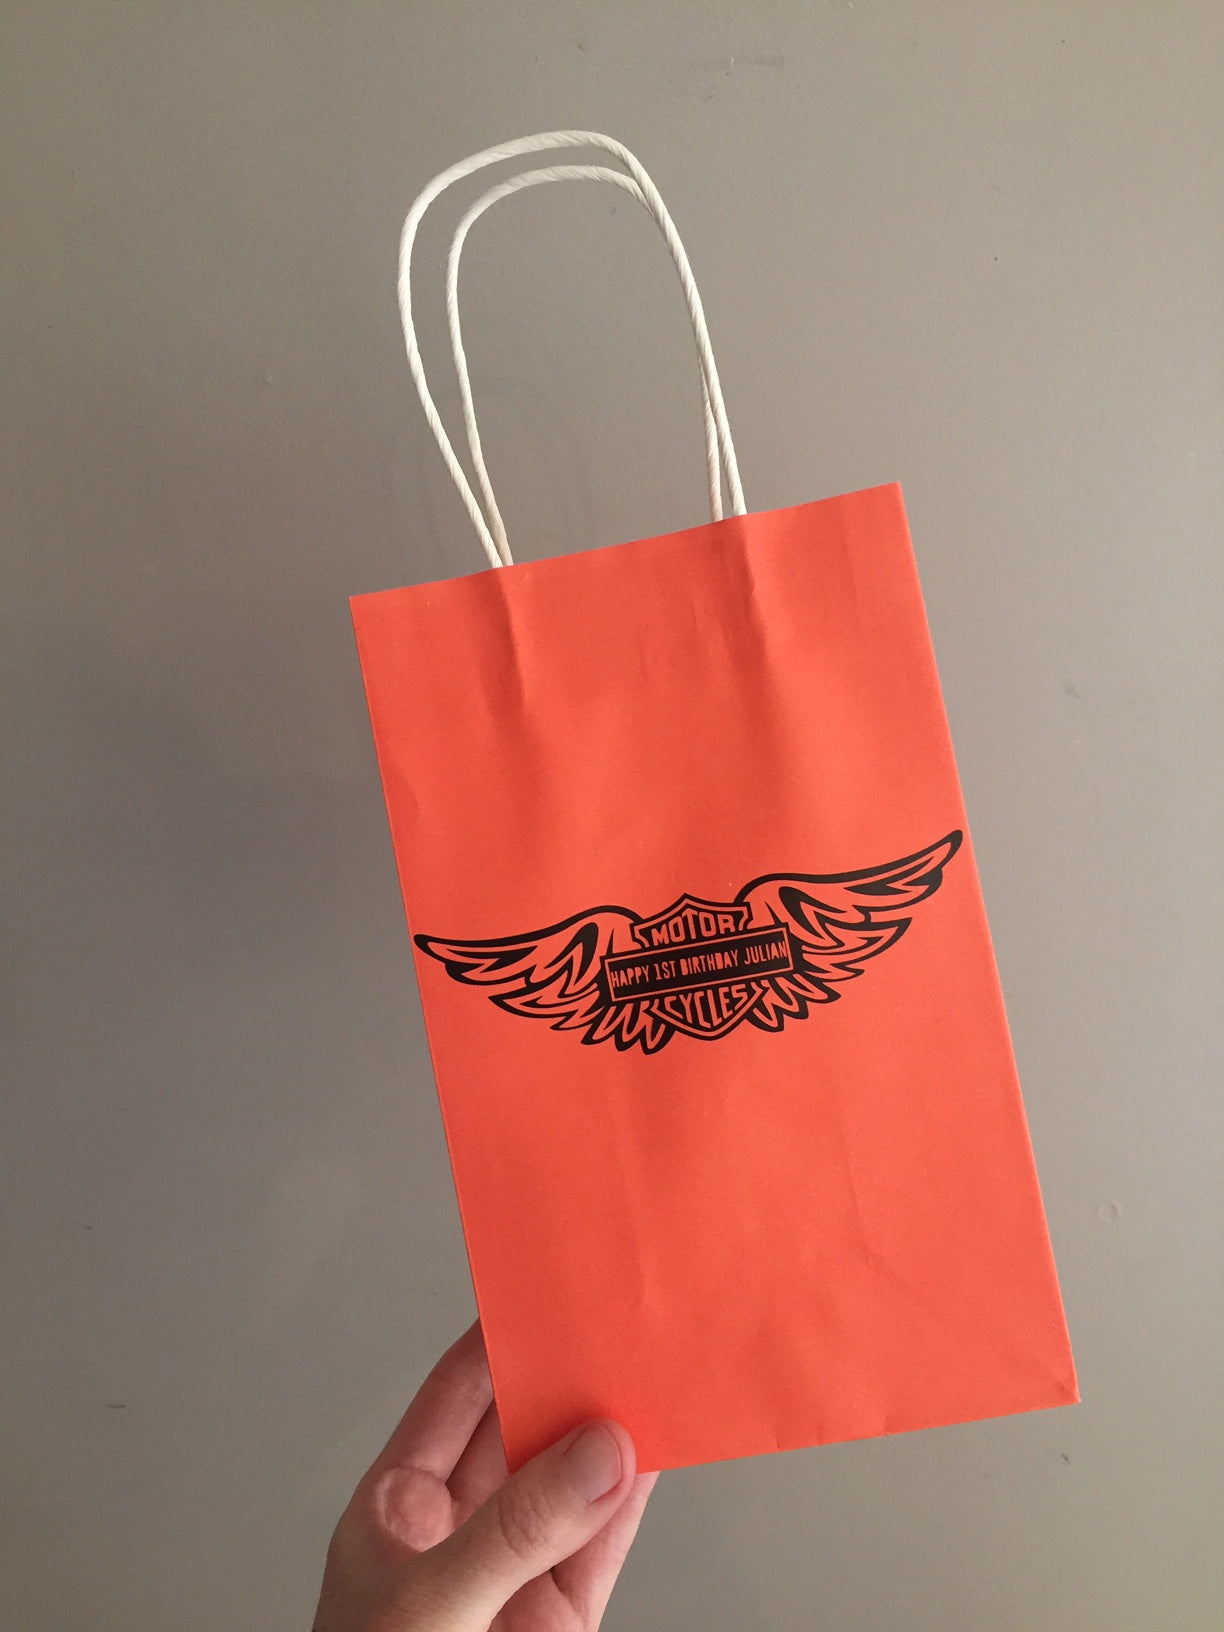 Harley davidson motorbike themed party bags